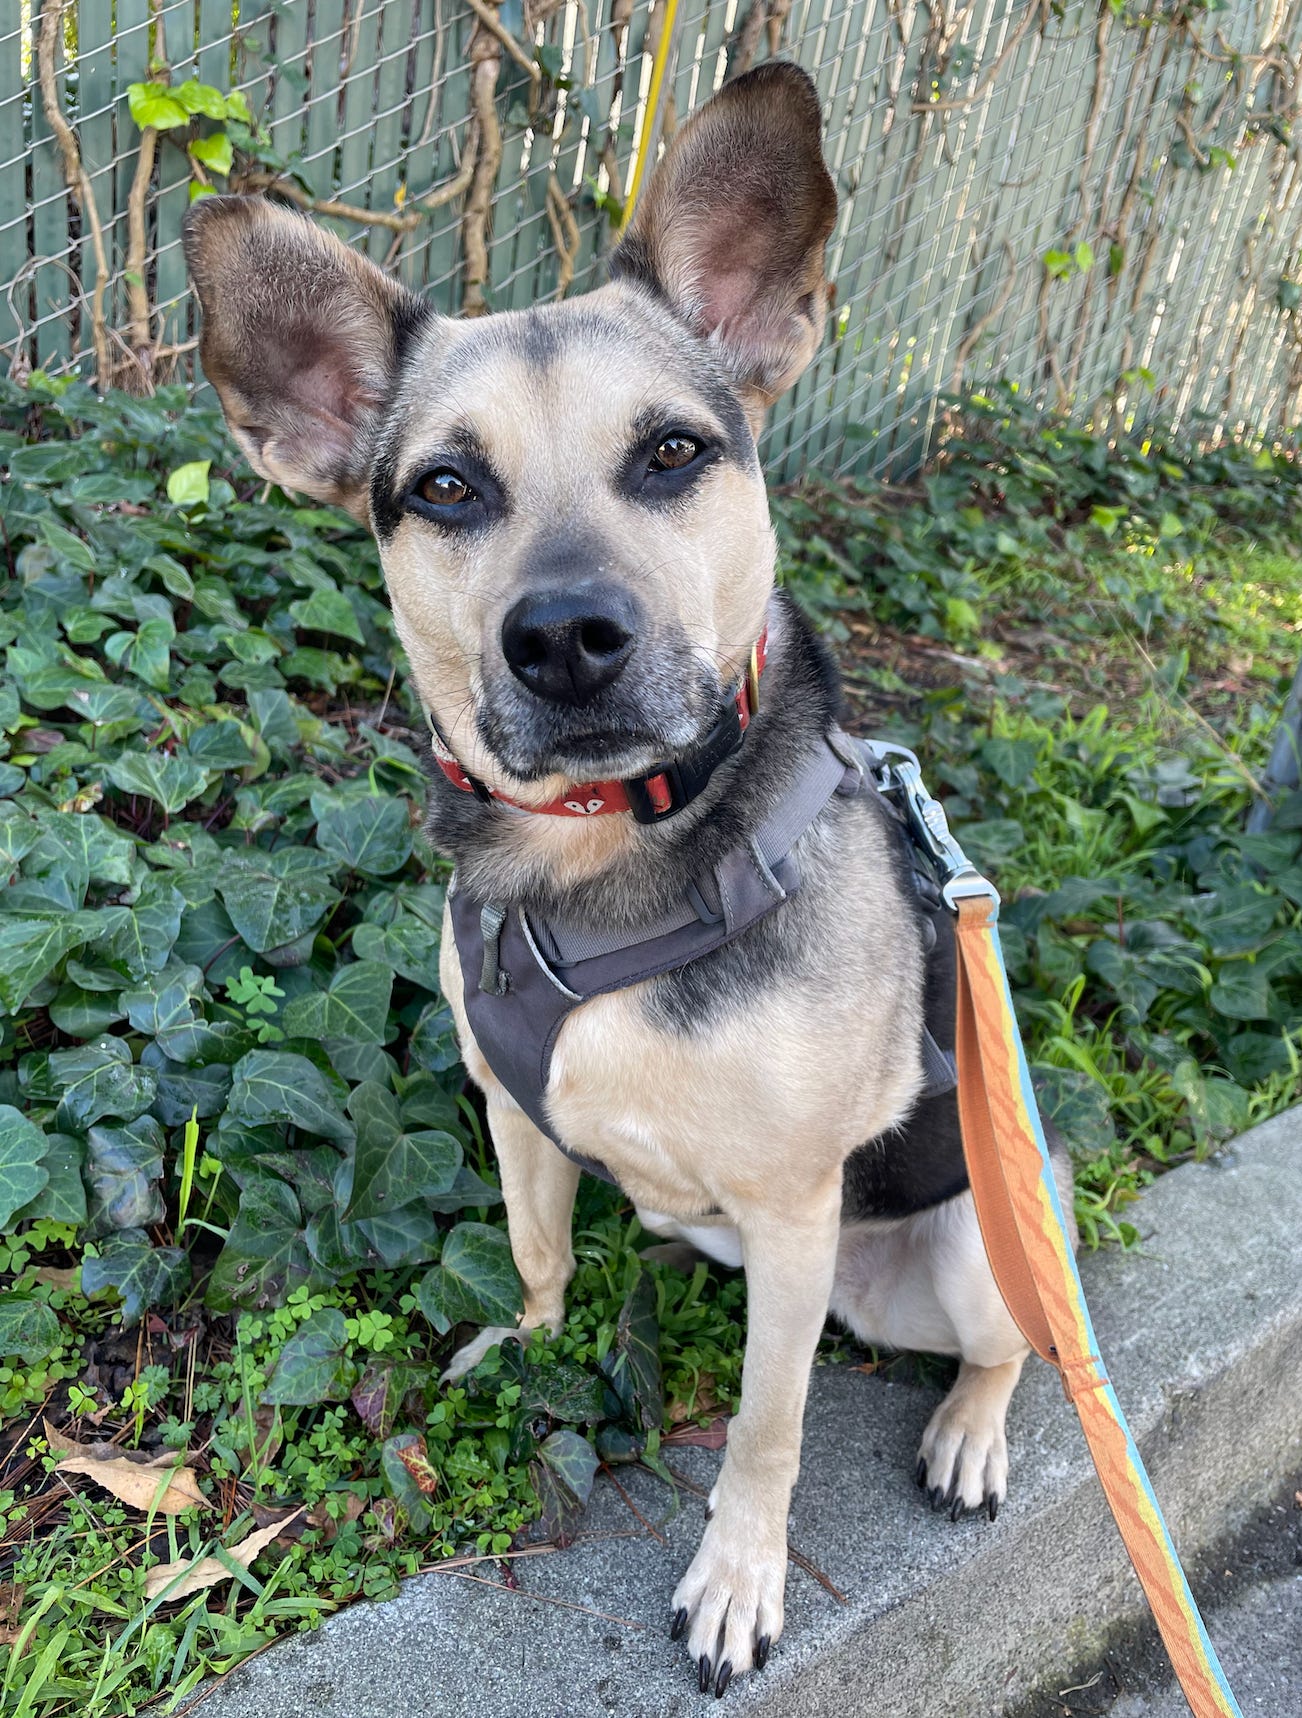 brown and black dog wearing an orange collar with foxes on it, a grey harness, and an orange leash, ears up staring right at the camera